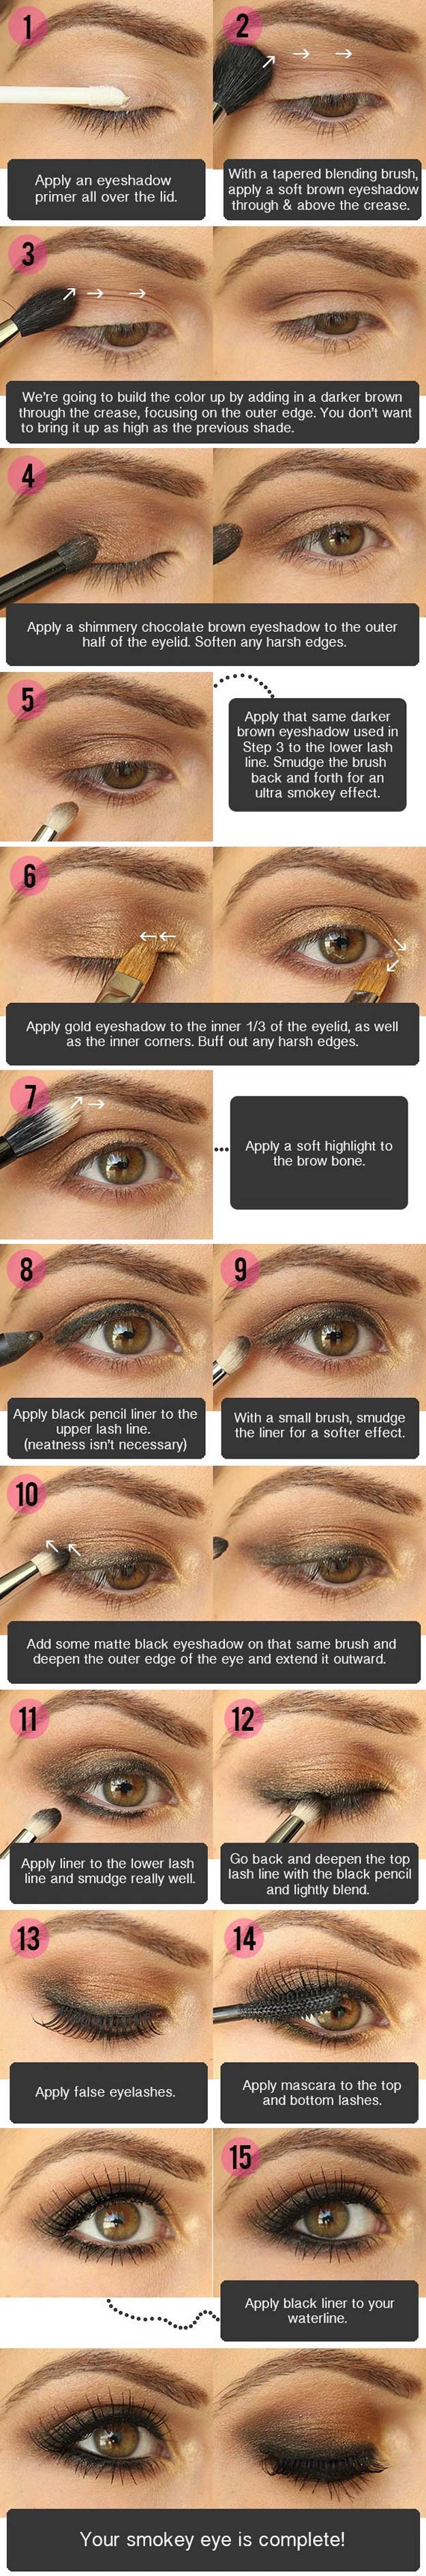 Best Eyeshadow Tutorials - Smokey Brown Eyeshadow - Easy Step by Step How To For Eye Shadow - Cool Makeup Tricks and Eye Makeup Tutorial With Instructions - Quick Ways to Do Smoky Eye, Natural Makeup, Looks for Day and Evening, Brown and Blue Eyes - Cool Ideas for Beginners and Teens 